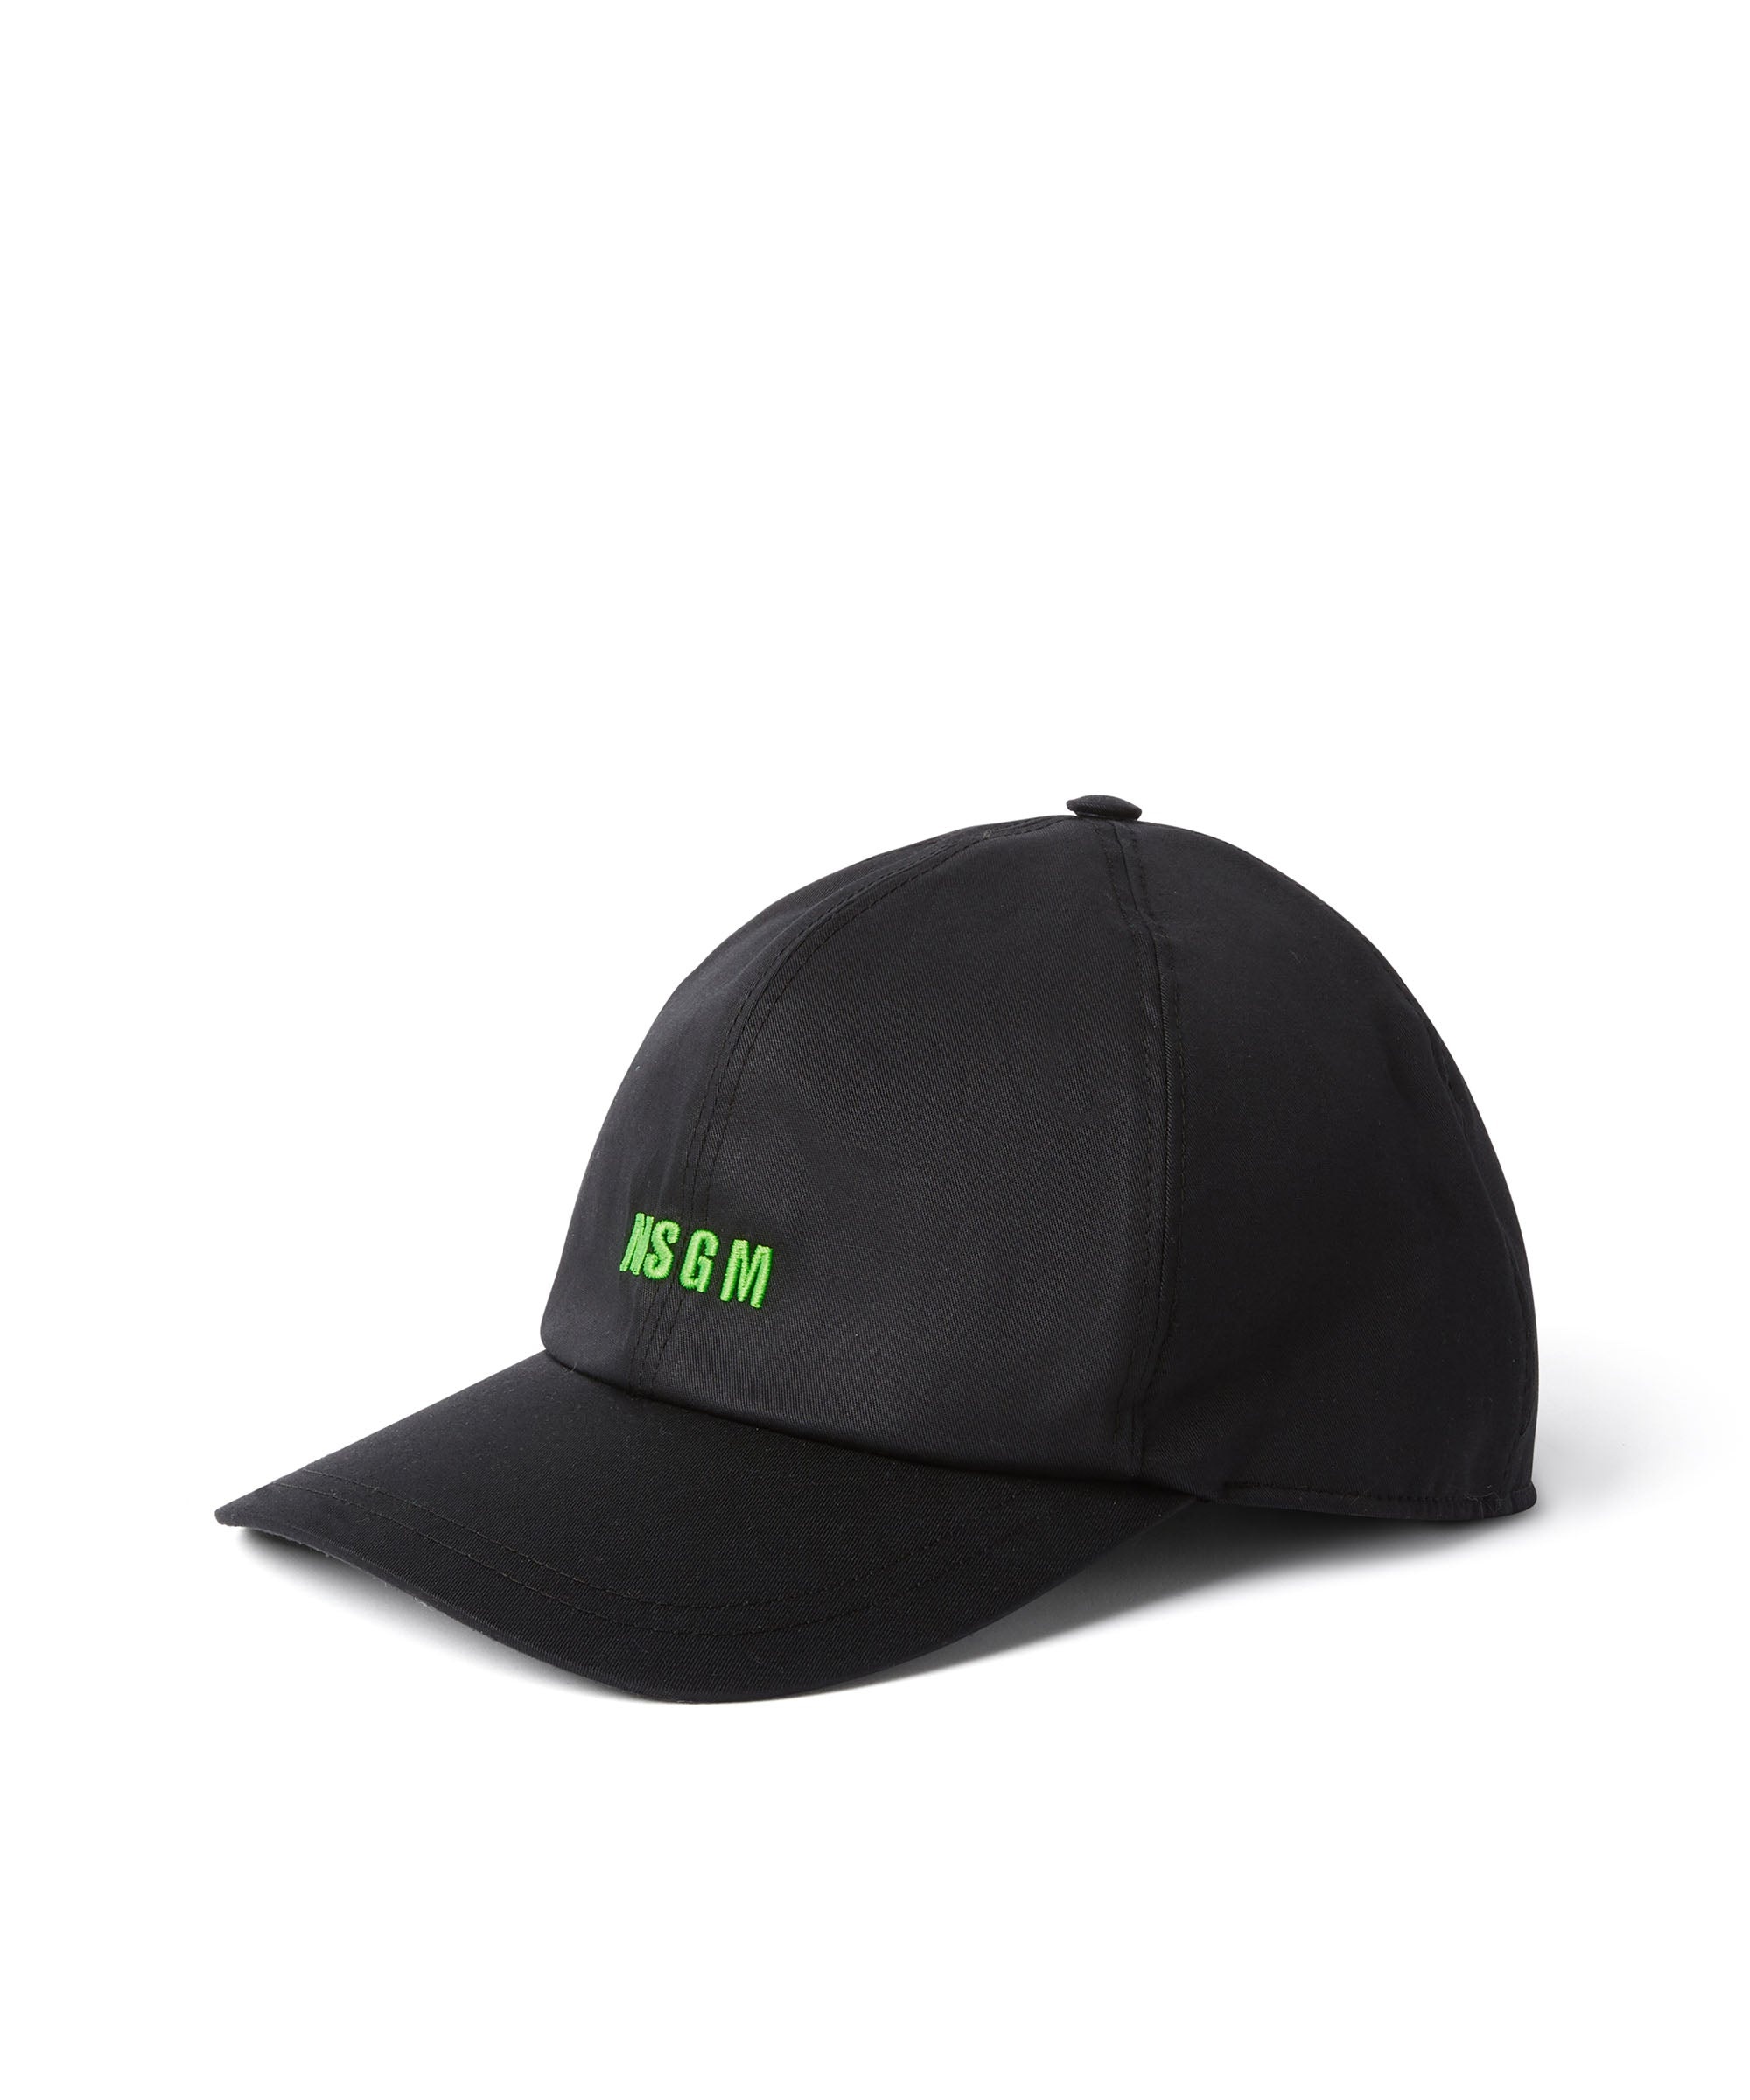 Baseball cap with embroidered logo - 1